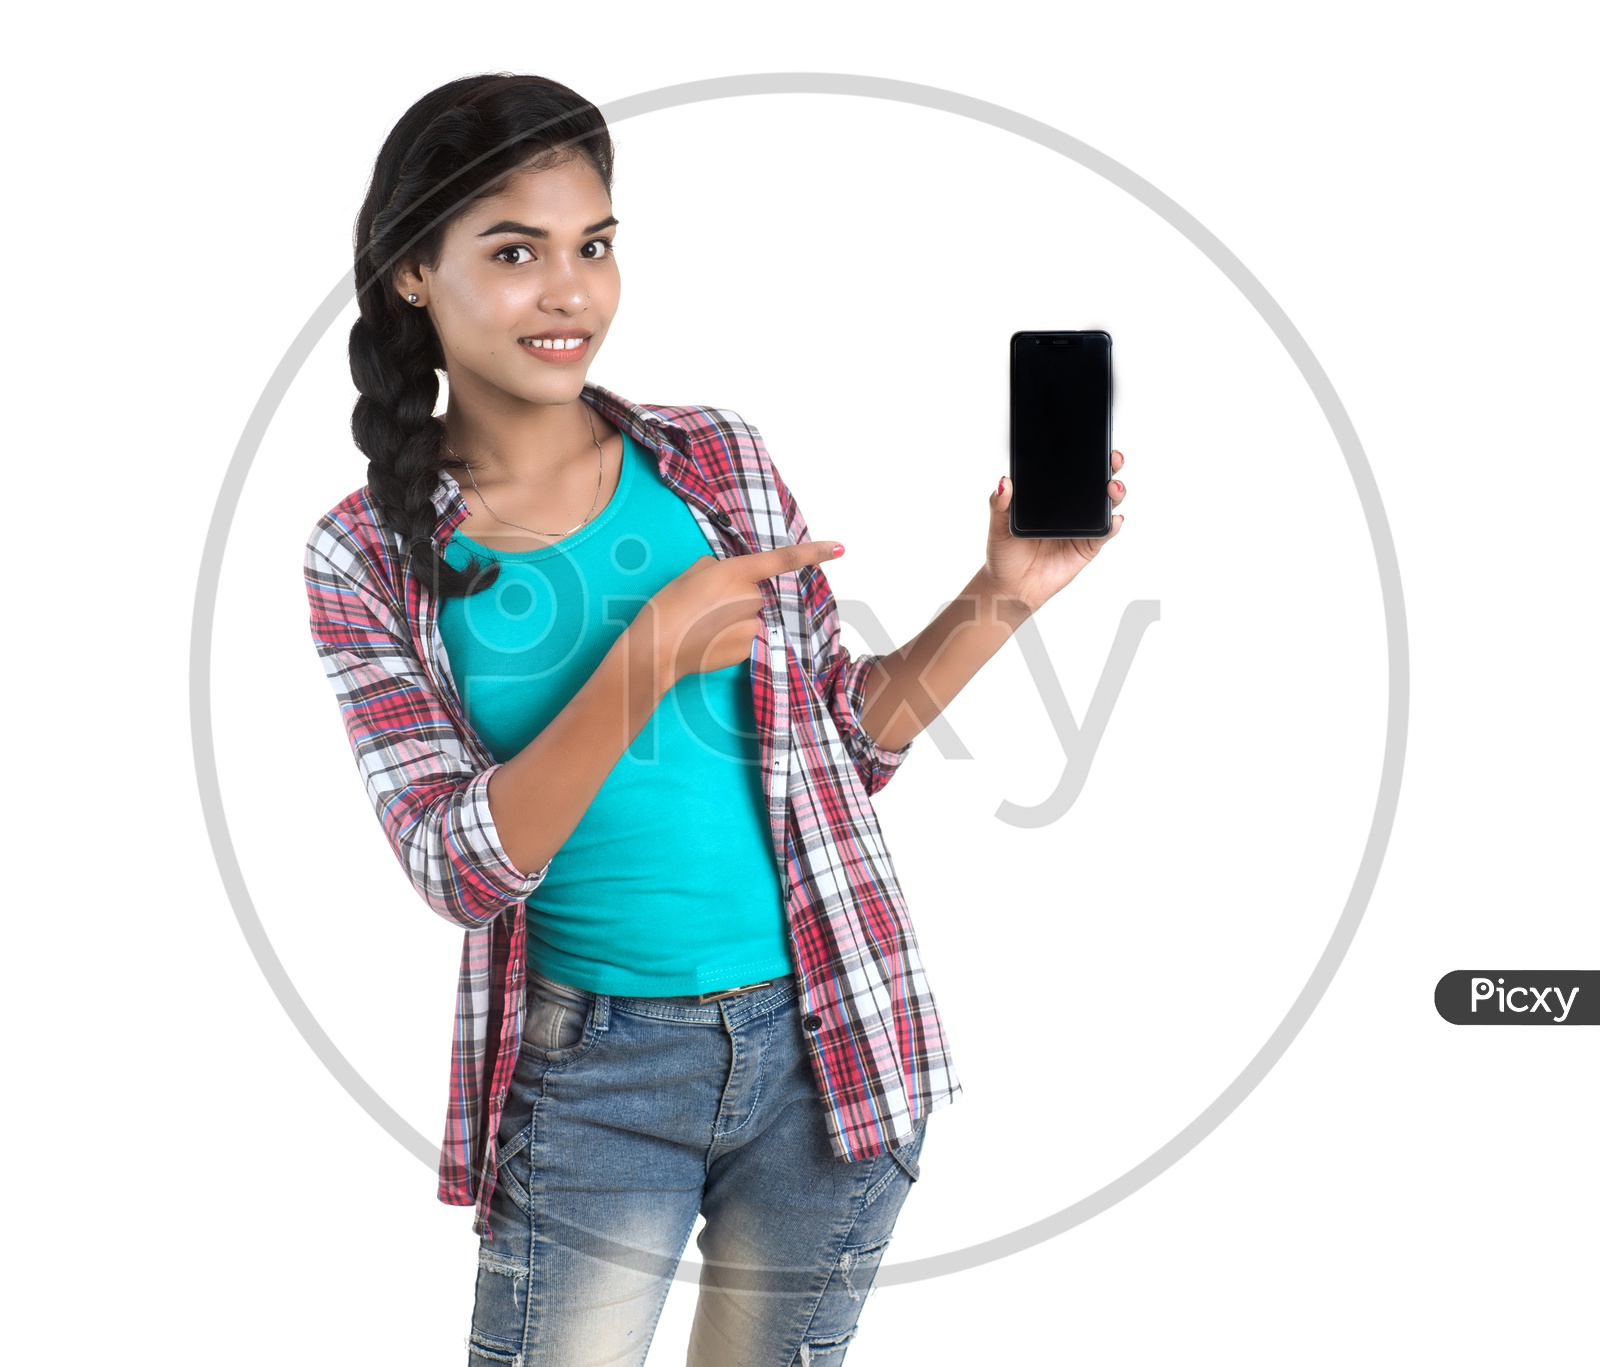 Pretty Young Girl Showing Blank Smart Phone Screen on an Isolated White Background